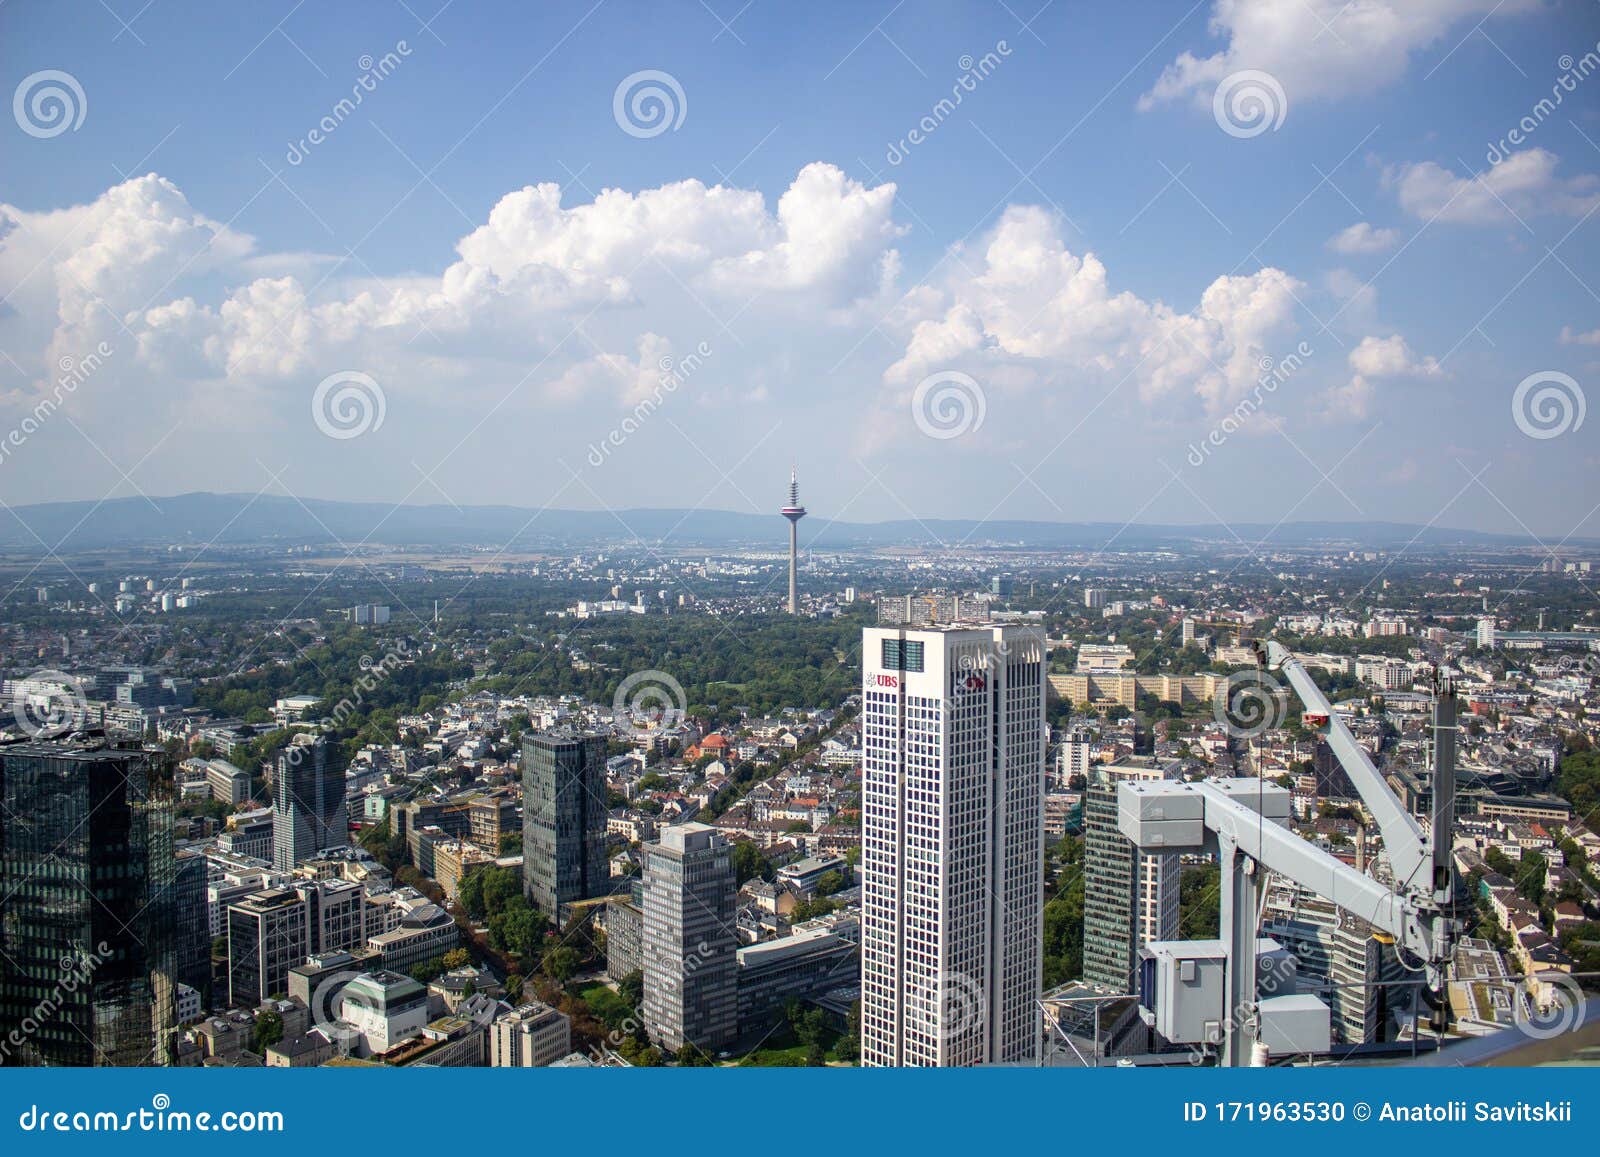 view from the maintower in frankfurt am main, germany